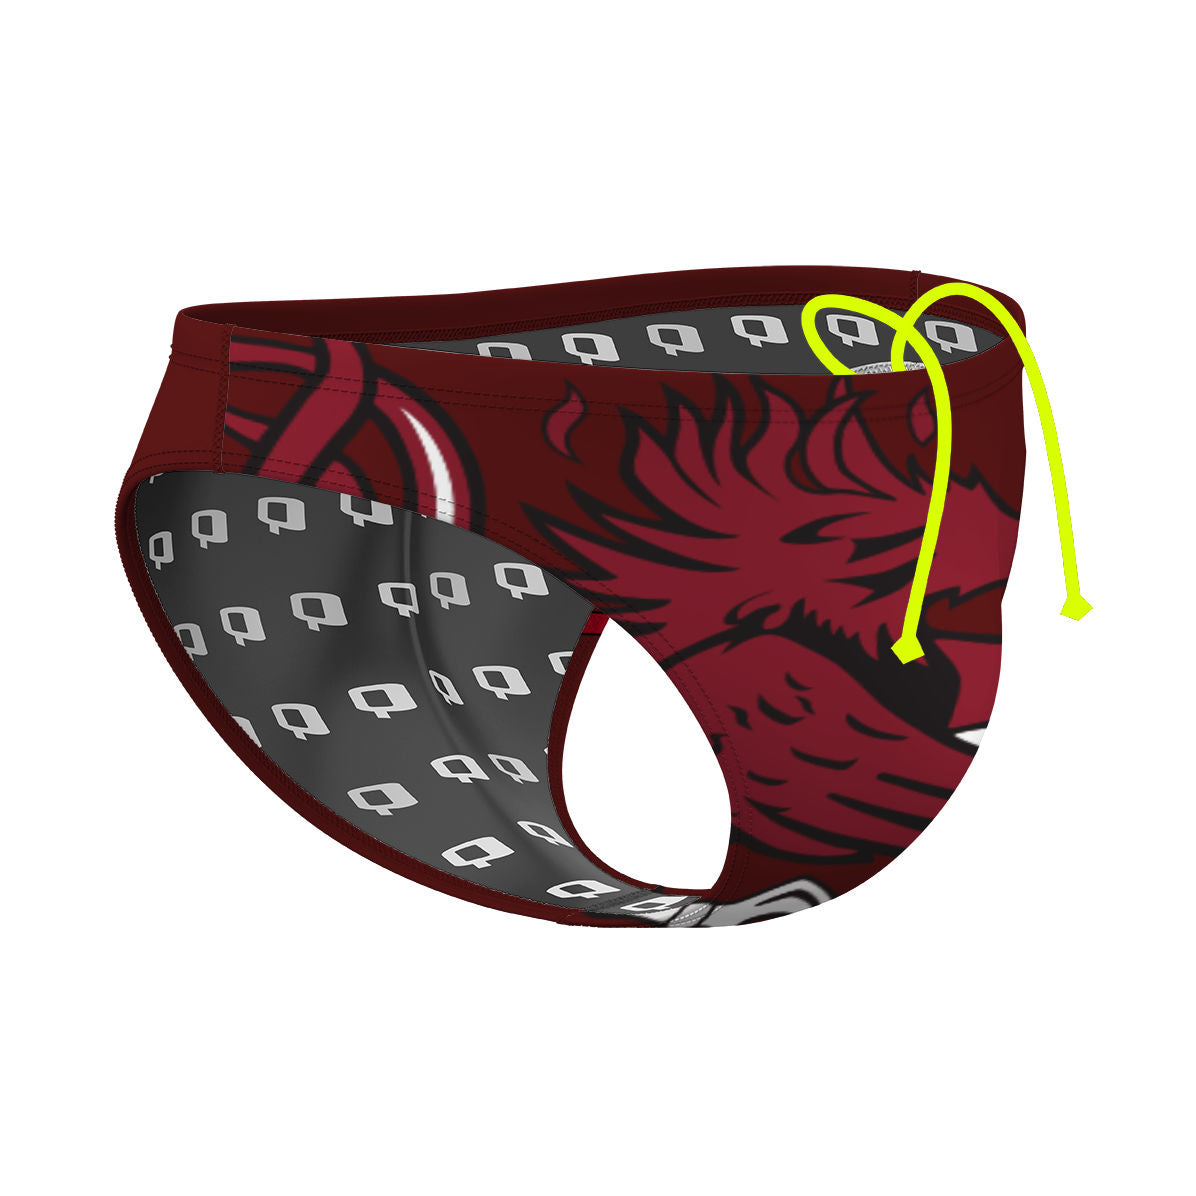 Massive Gamecock - Waterpolo Brief Swimsuit